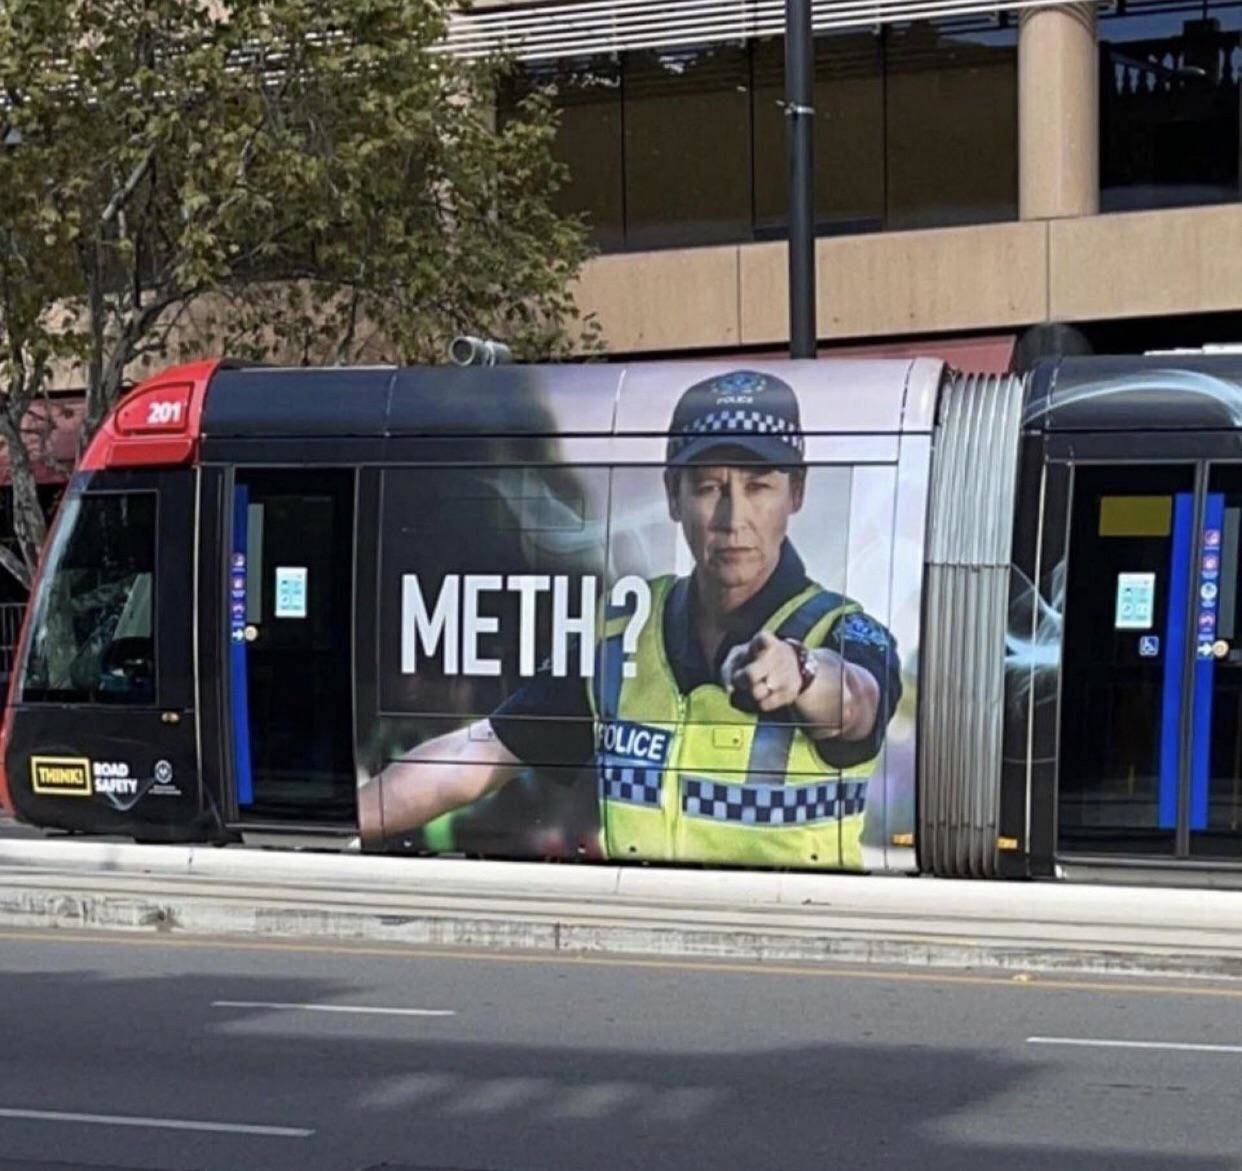 bus sign cut off so it only reads meth